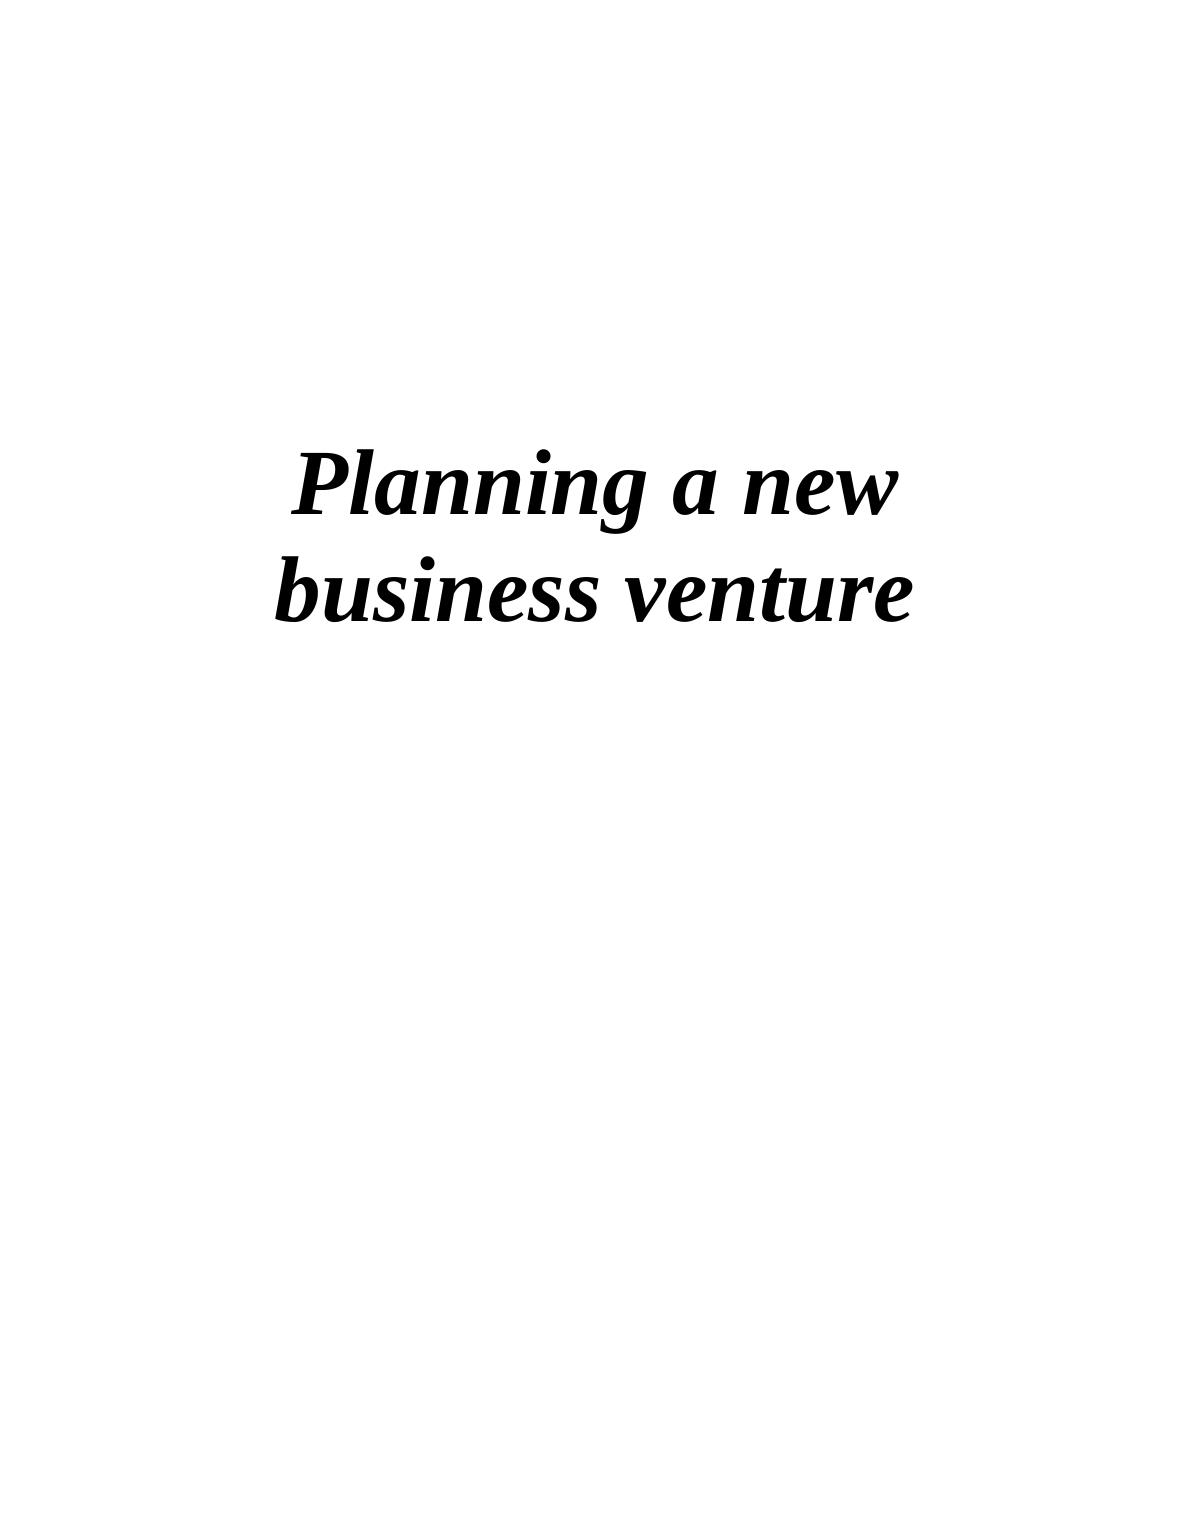 Planning A New Business Venture Assignment - Unicorn_1